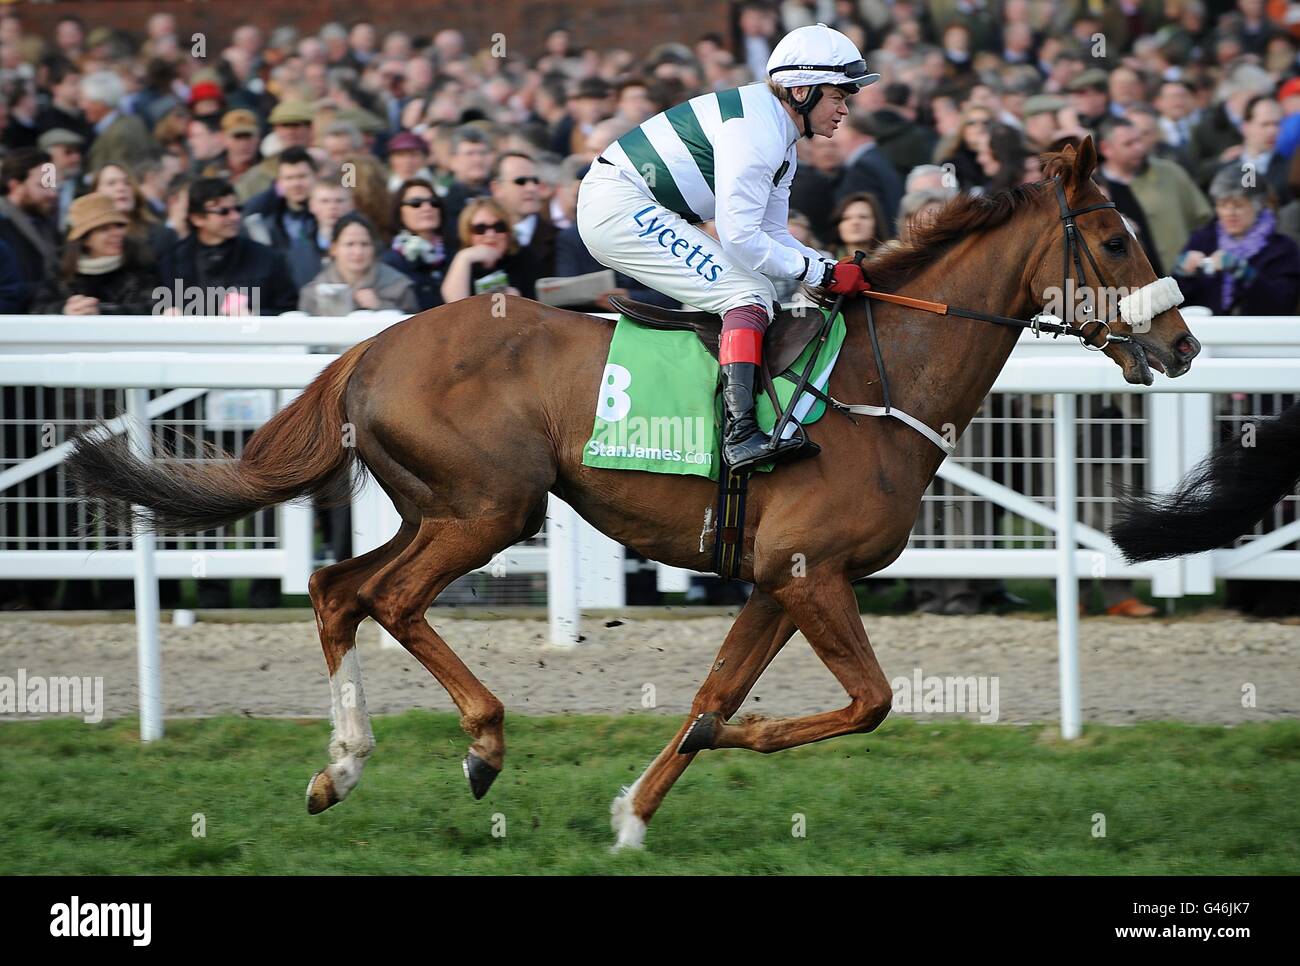 Recession Proof ridden by Robert Thornton going to post for the Stan James Supreme Novices' Hurdle on Centenary Day, during the Cheltenham Festival. Stock Photo